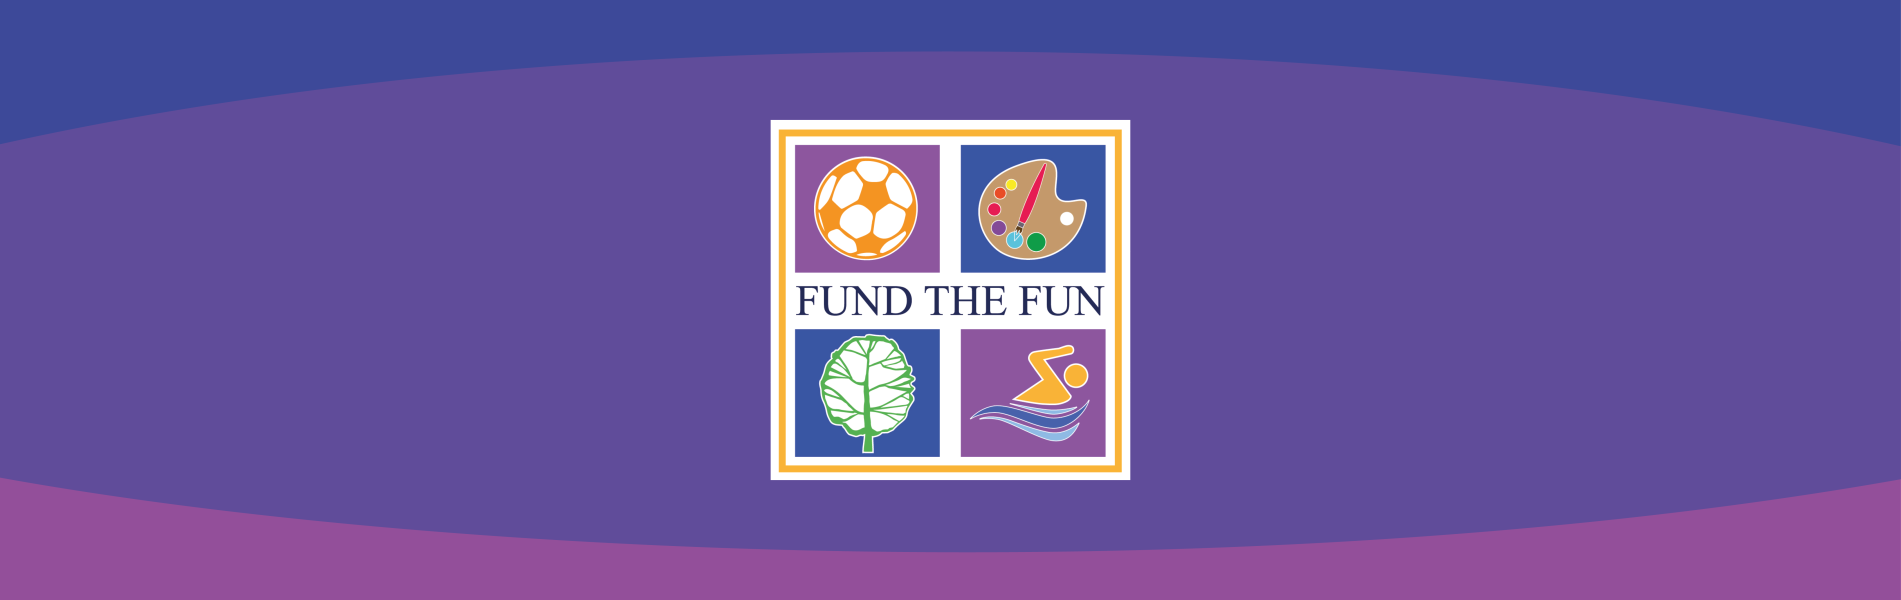 Digital Banner for Fund the Fun Event